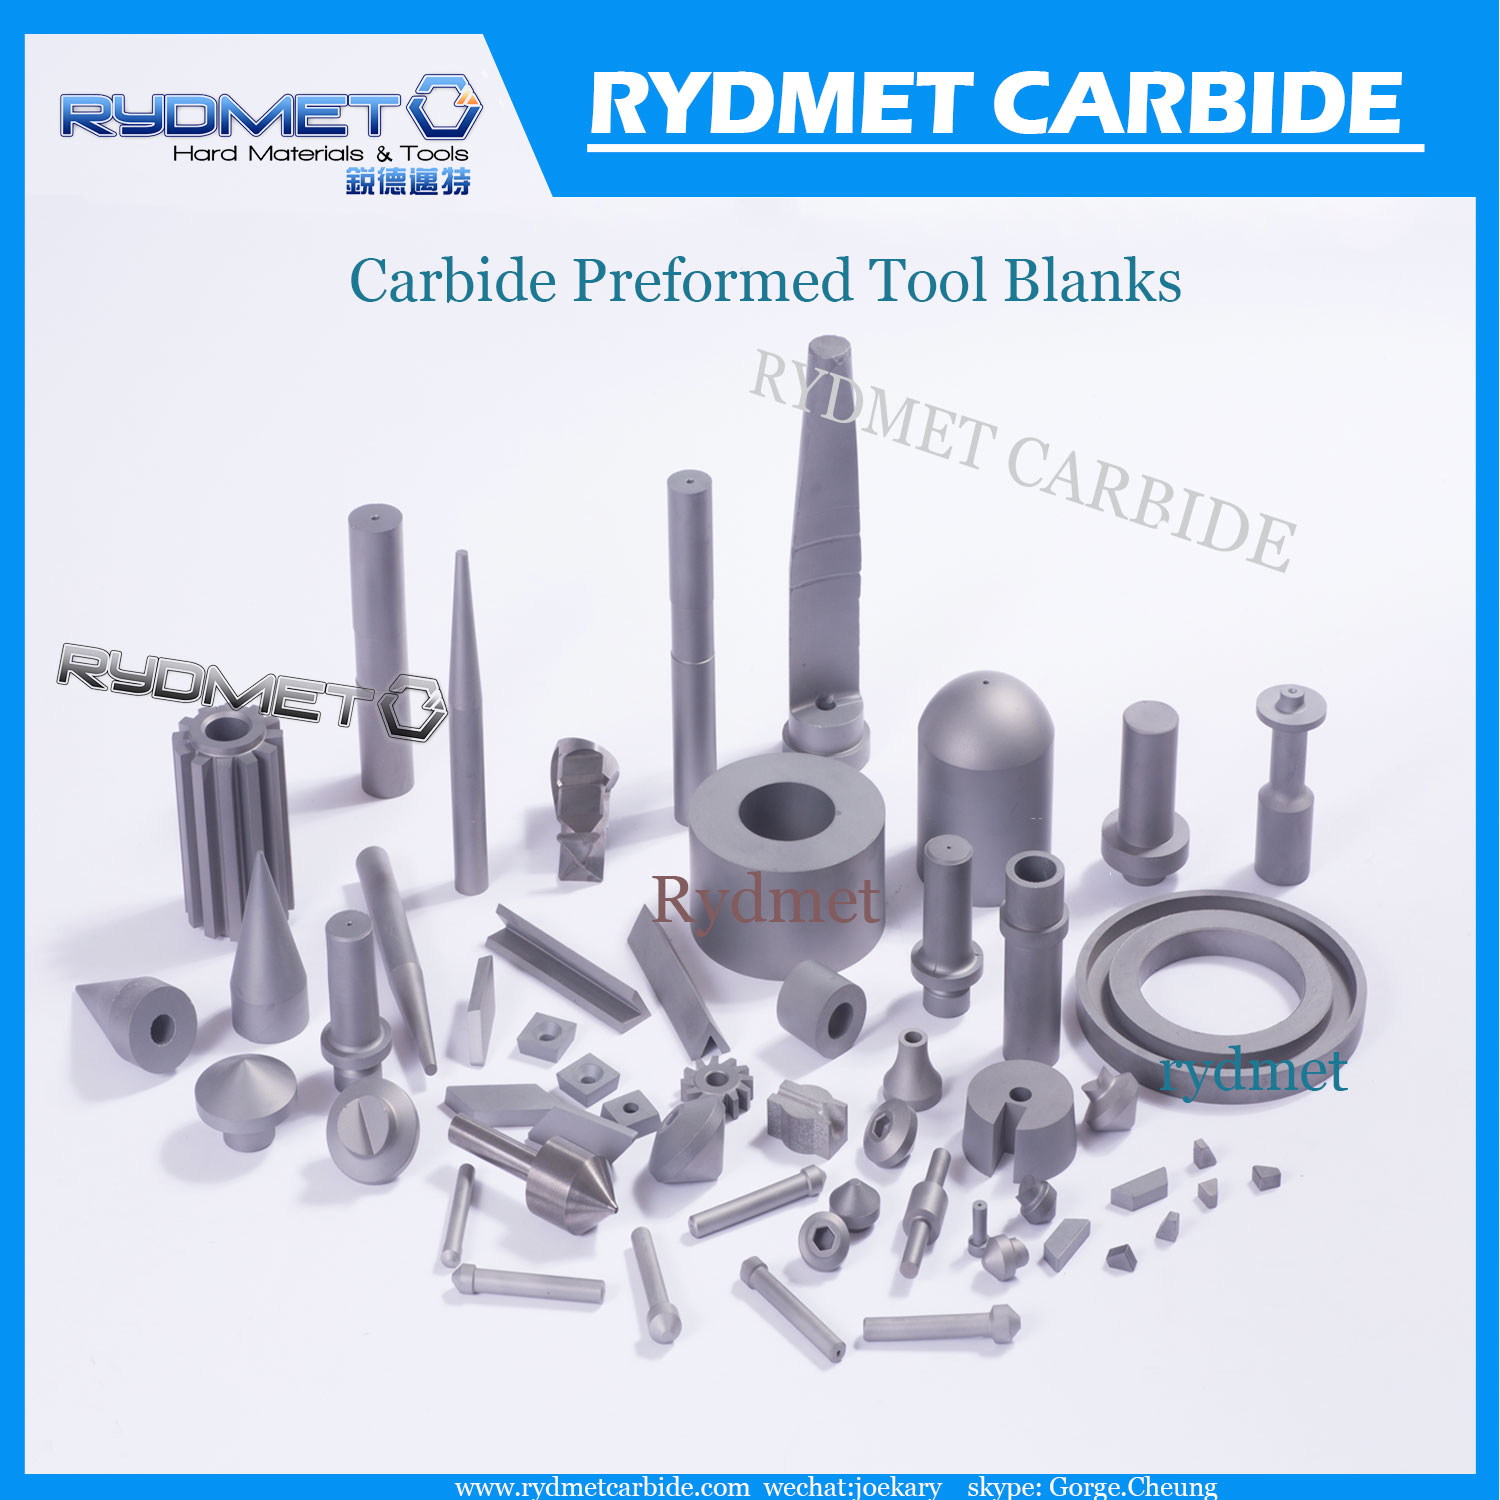 Special Tool Blanks and Preforms